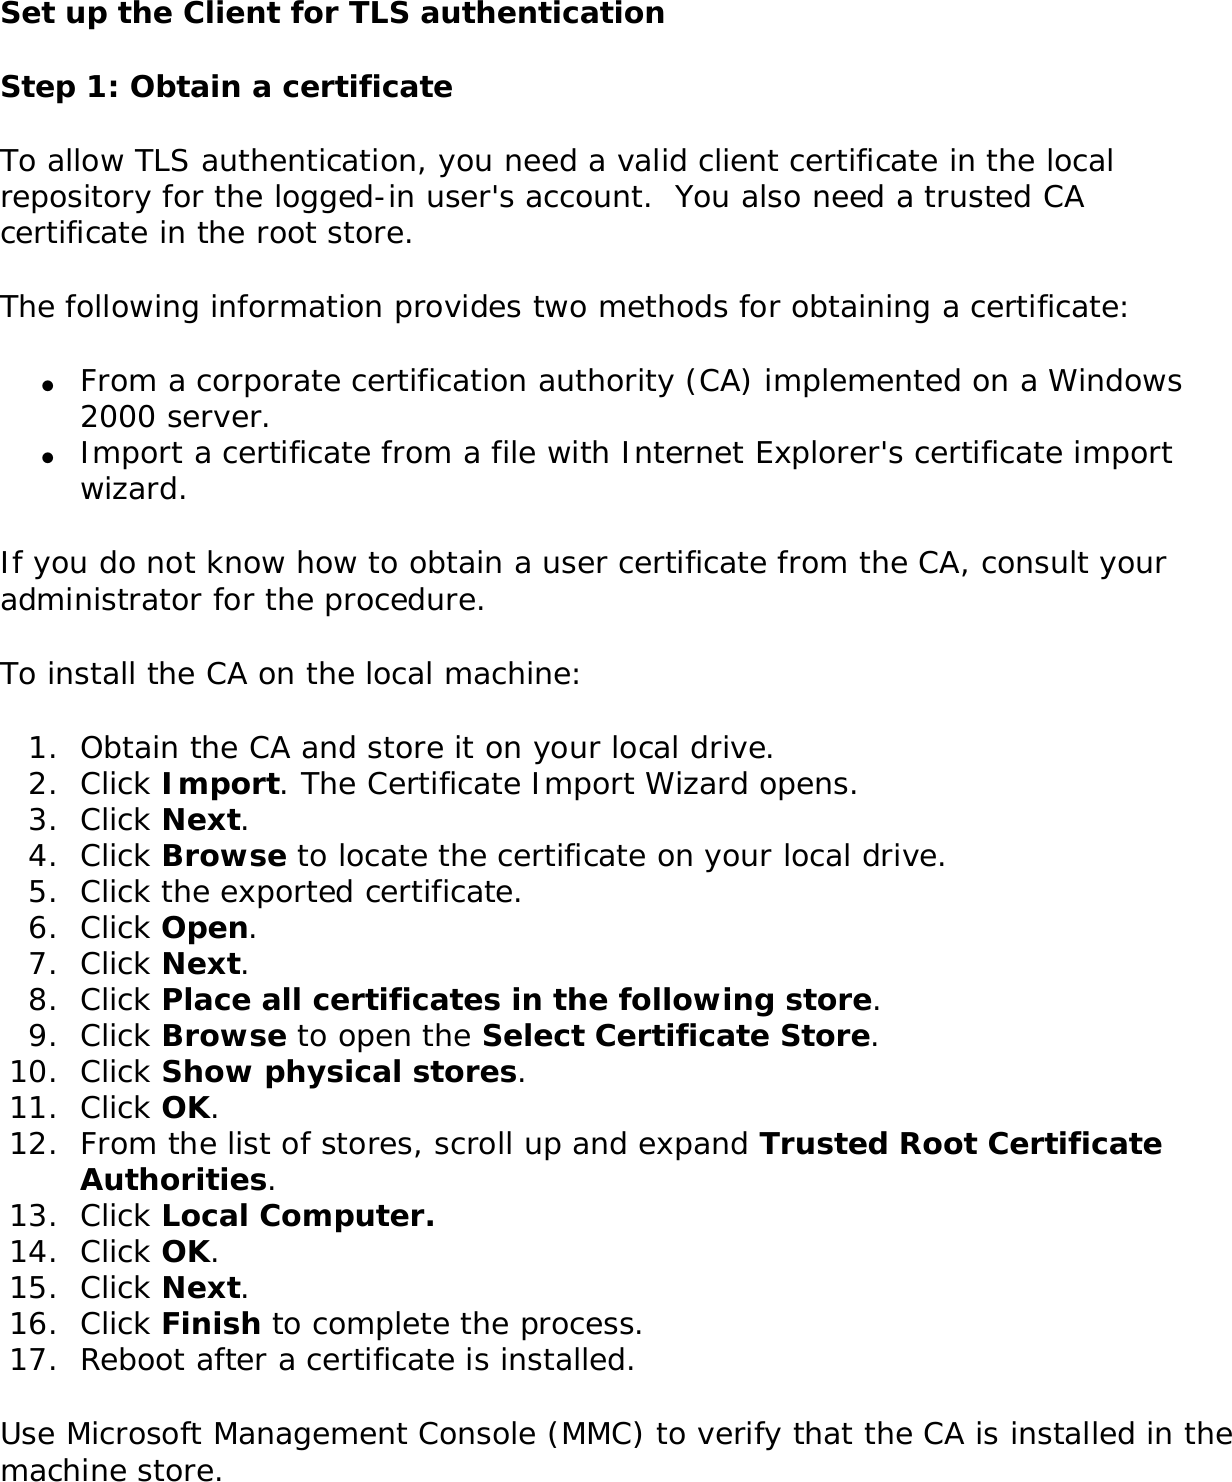 Set up the Client for TLS authenticationStep 1: Obtain a certificate To allow TLS authentication, you need a valid client certificate in the local repository for the logged-in user&apos;s account.  You also need a trusted CA certificate in the root store. The following information provides two methods for obtaining a certificate: ●     From a corporate certification authority (CA) implemented on a Windows 2000 server.●     Import a certificate from a file with Internet Explorer&apos;s certificate import wizard.If you do not know how to obtain a user certificate from the CA, consult your administrator for the procedure. To install the CA on the local machine: 1.  Obtain the CA and store it on your local drive.2.  Click Import. The Certificate Import Wizard opens.3.  Click Next.4.  Click Browse to locate the certificate on your local drive.5.  Click the exported certificate.6.  Click Open.7.  Click Next.8.  Click Place all certificates in the following store.9.  Click Browse to open the Select Certificate Store.10.  Click Show physical stores.11.  Click OK.12.  From the list of stores, scroll up and expand Trusted Root Certificate Authorities. 13.  Click Local Computer.14.  Click OK.15.  Click Next.16.  Click Finish to complete the process. 17.  Reboot after a certificate is installed. Use Microsoft Management Console (MMC) to verify that the CA is installed in the machine store. 